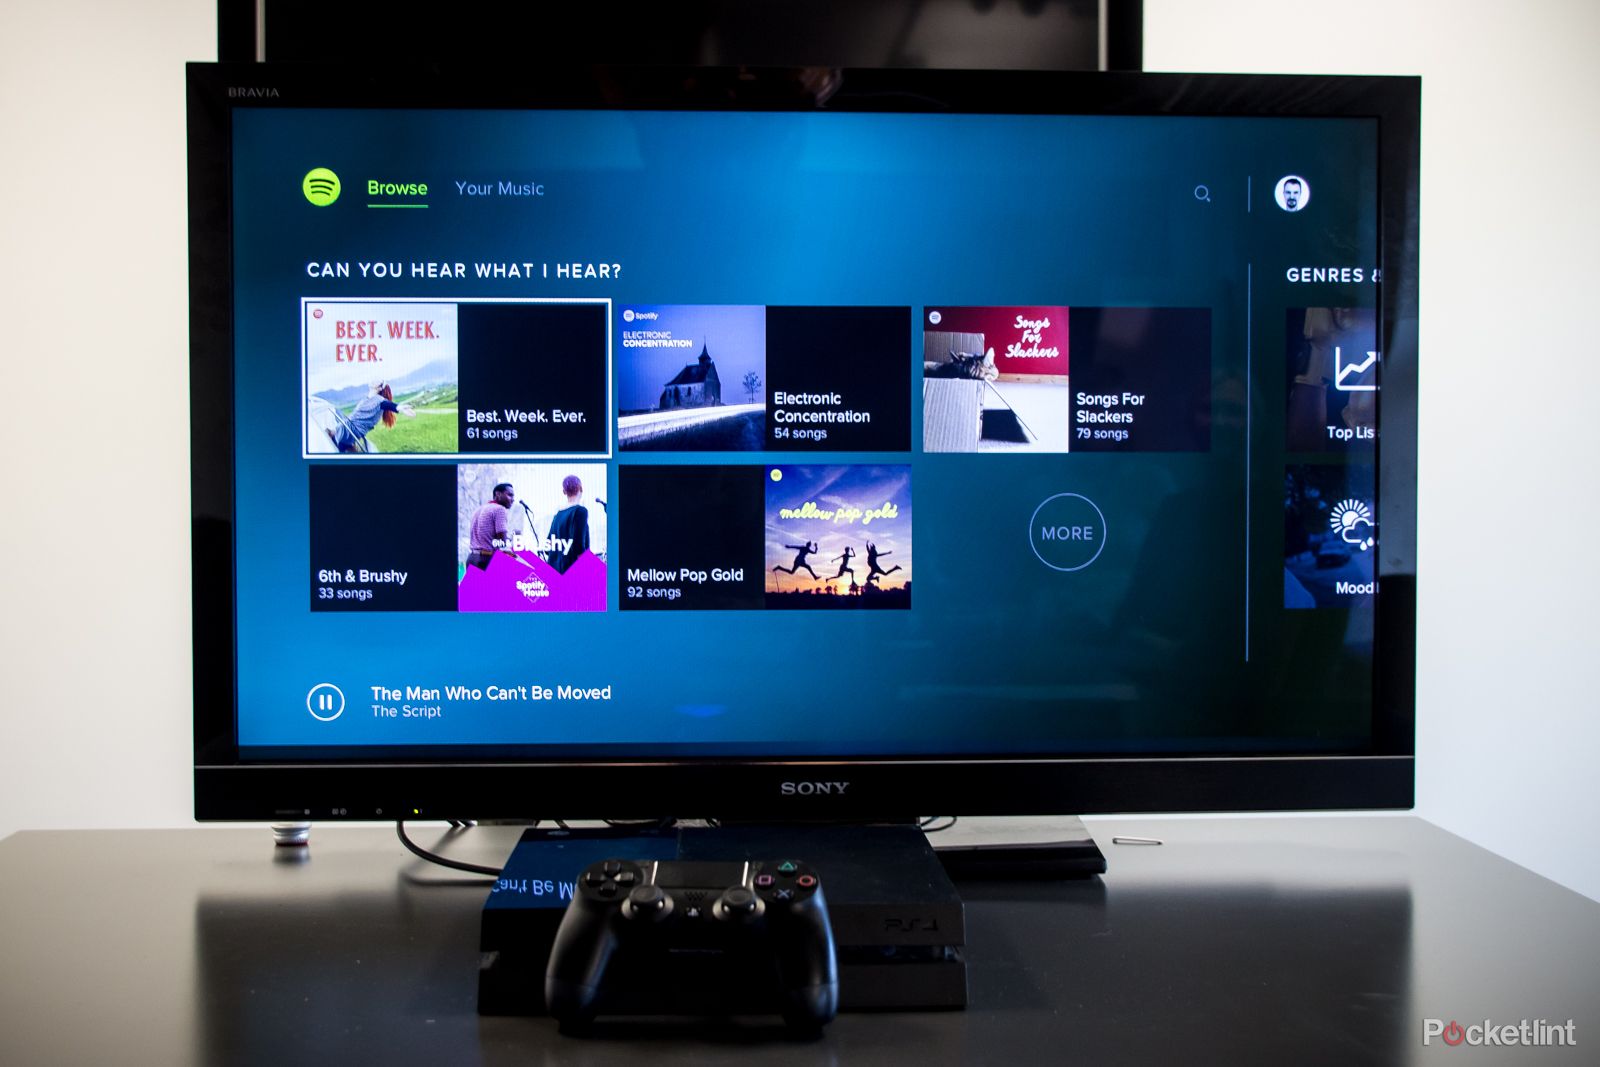 Spotify on PlayStation Music now available for PS4 and What does it offer?